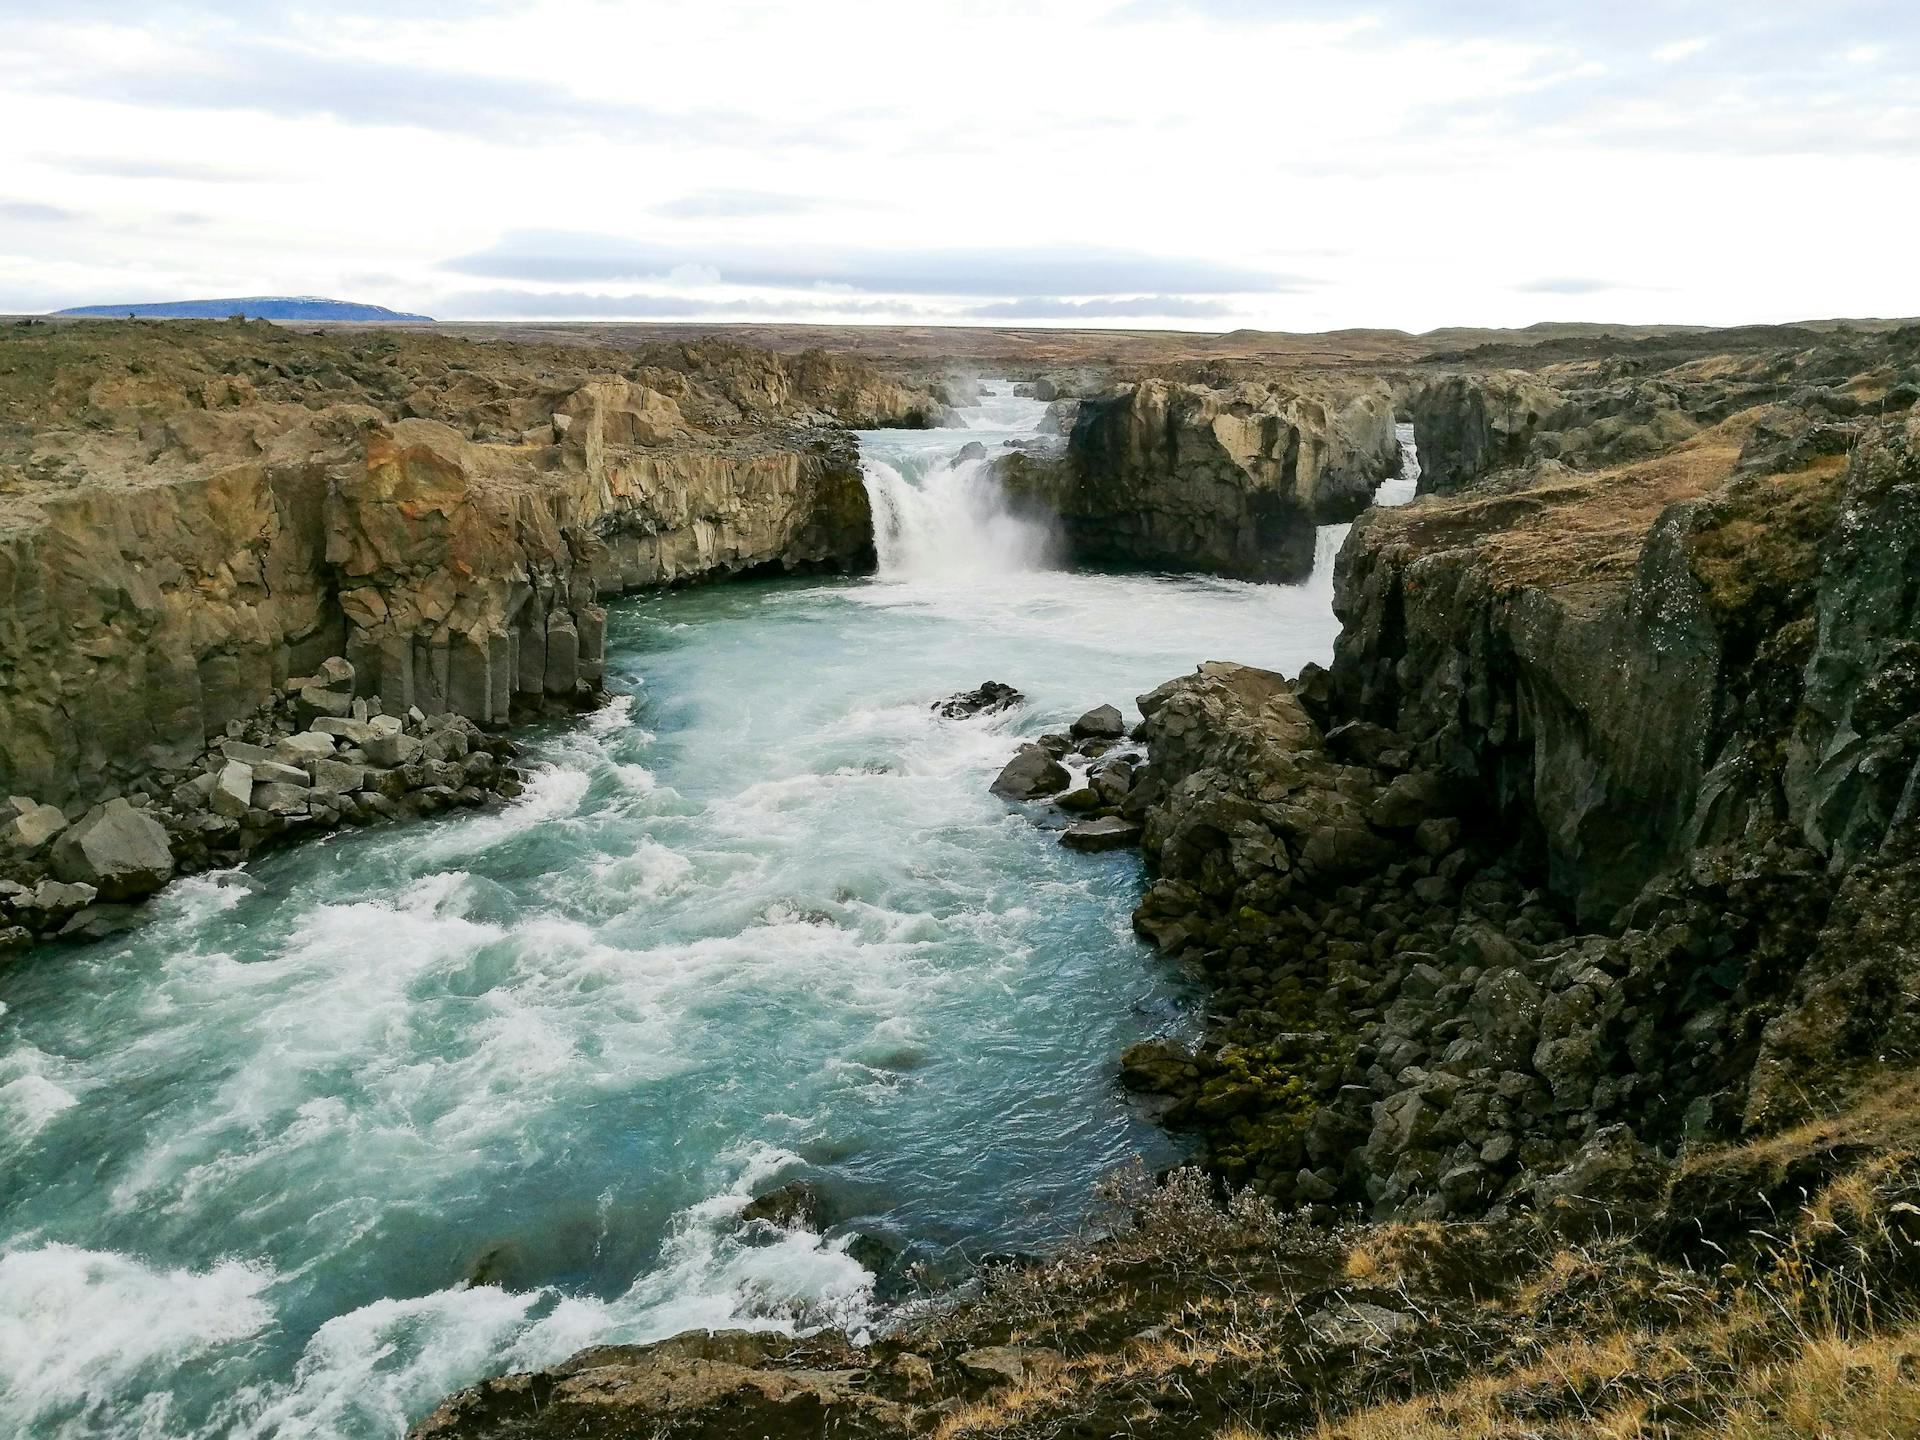 Hiking around the canyon in Aldeyjarfoss waterfall in north Iceland